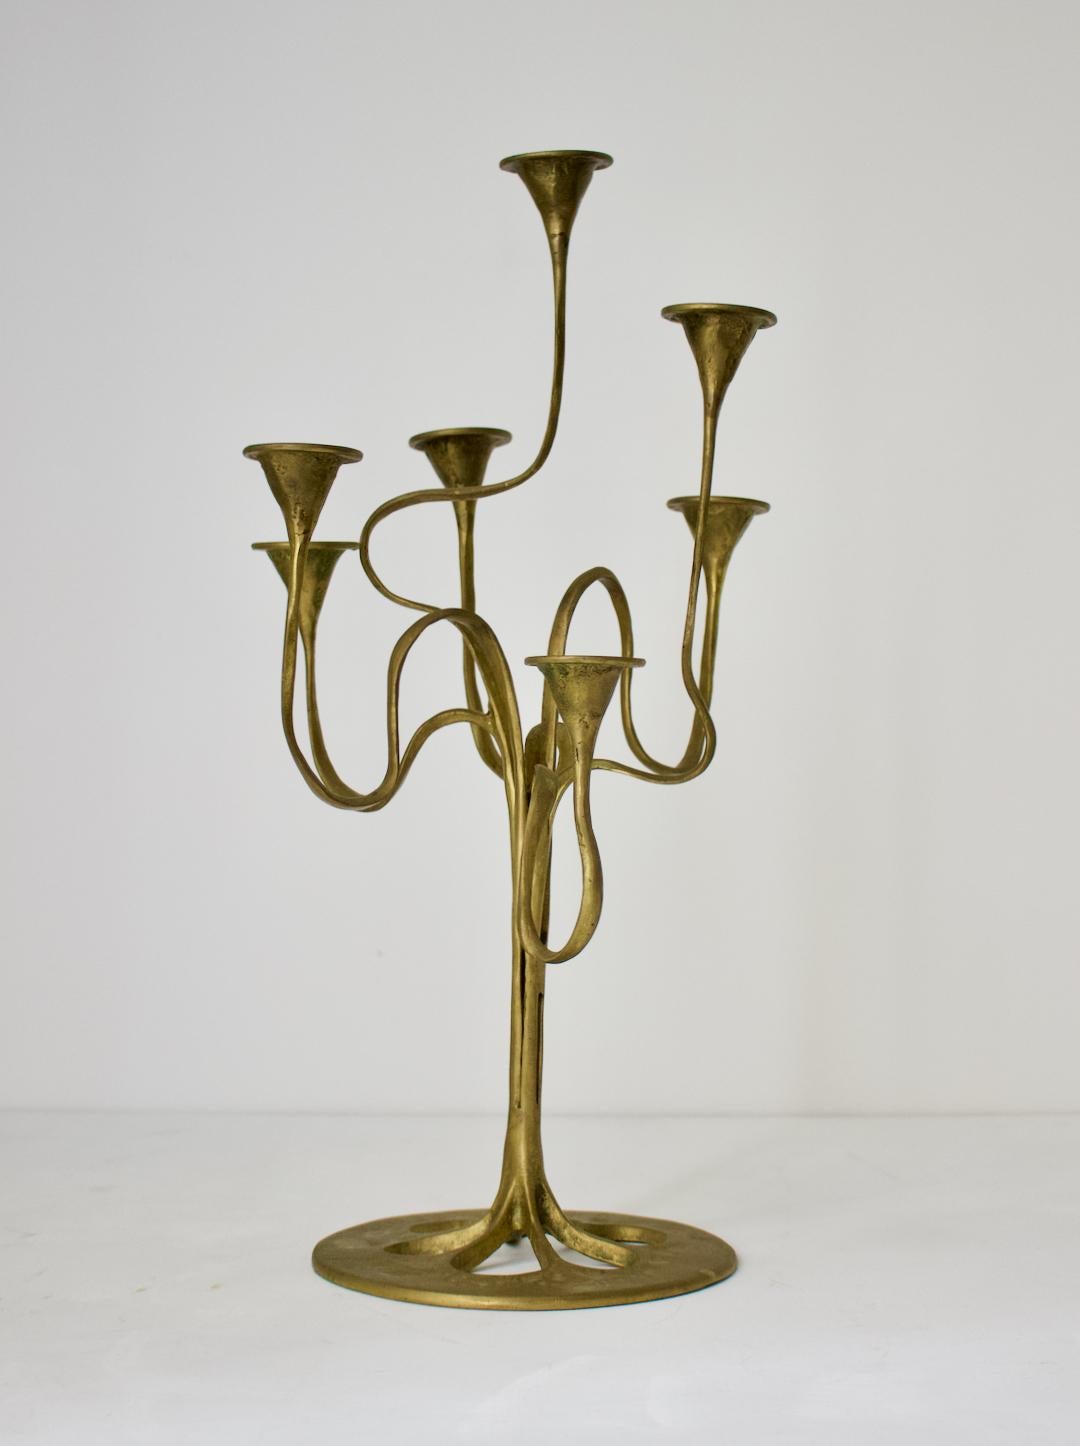 Candlestick or candelabra with seven arms of organic, ribbon form. Second half 20th century in Art Nouveau style. 

Good original condition with a nice aged patina, left as found. Minor signs of age and use, including small spots of oxidation and